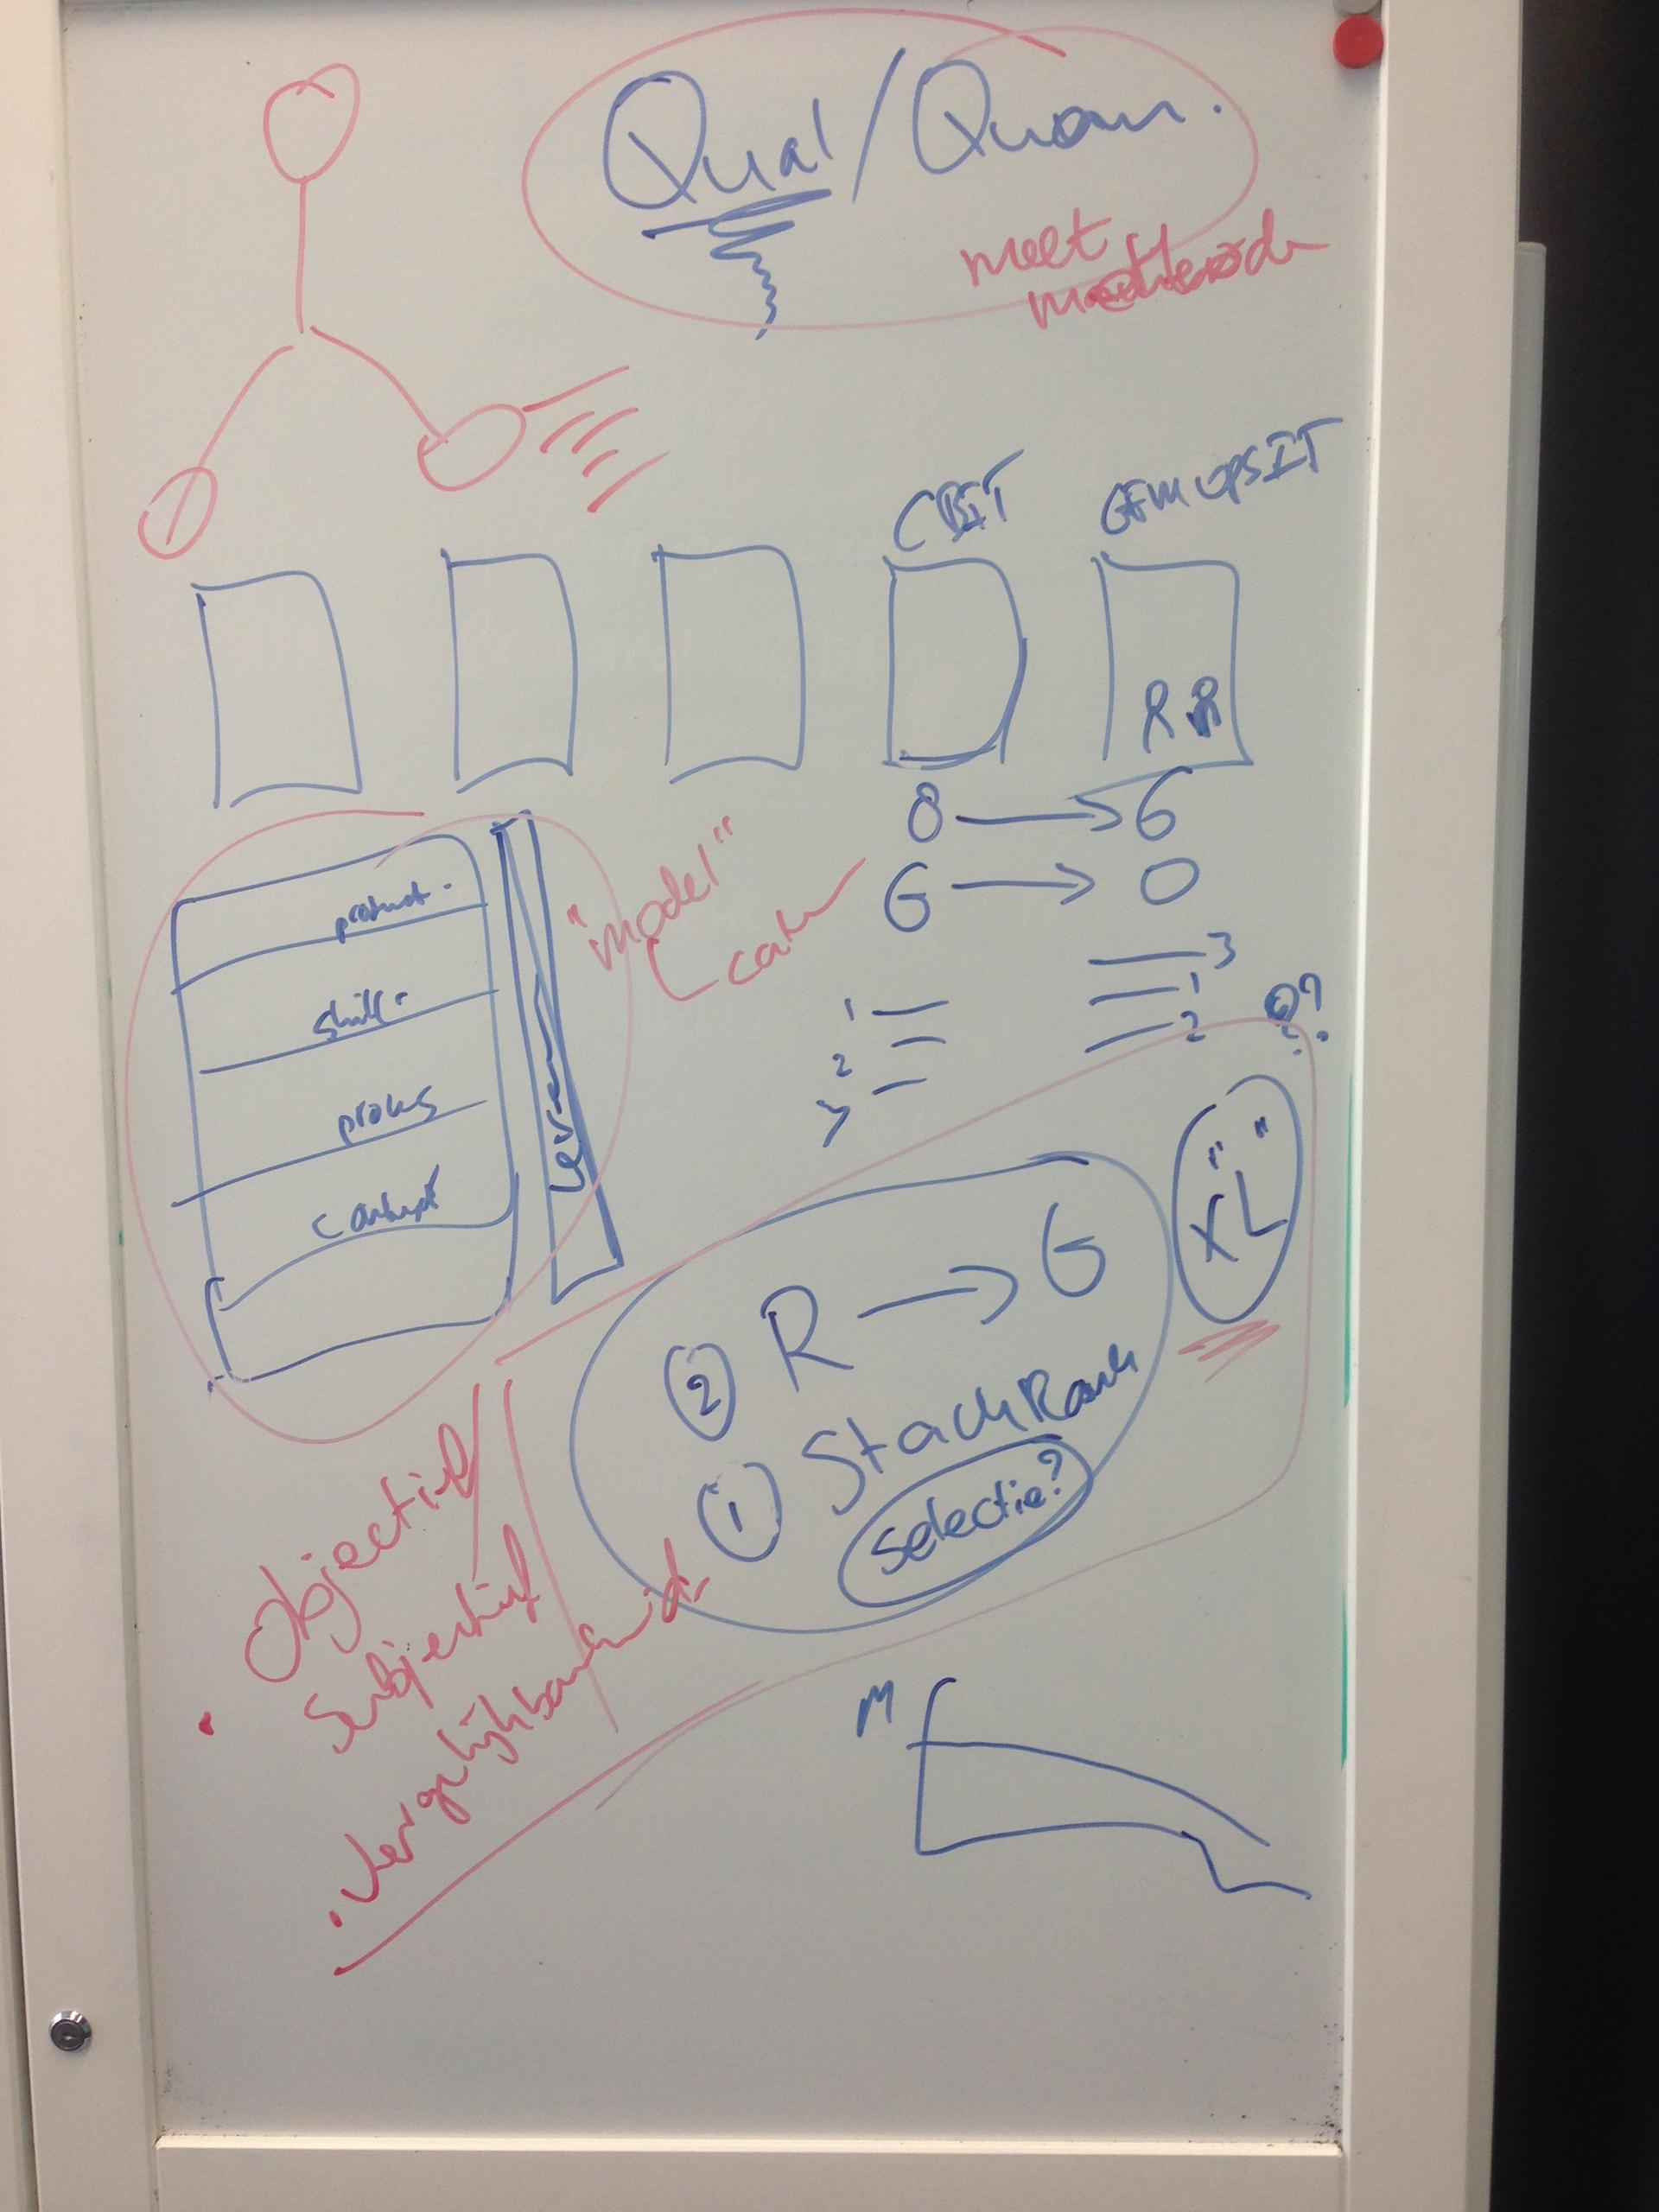 more notes on a whiteboard